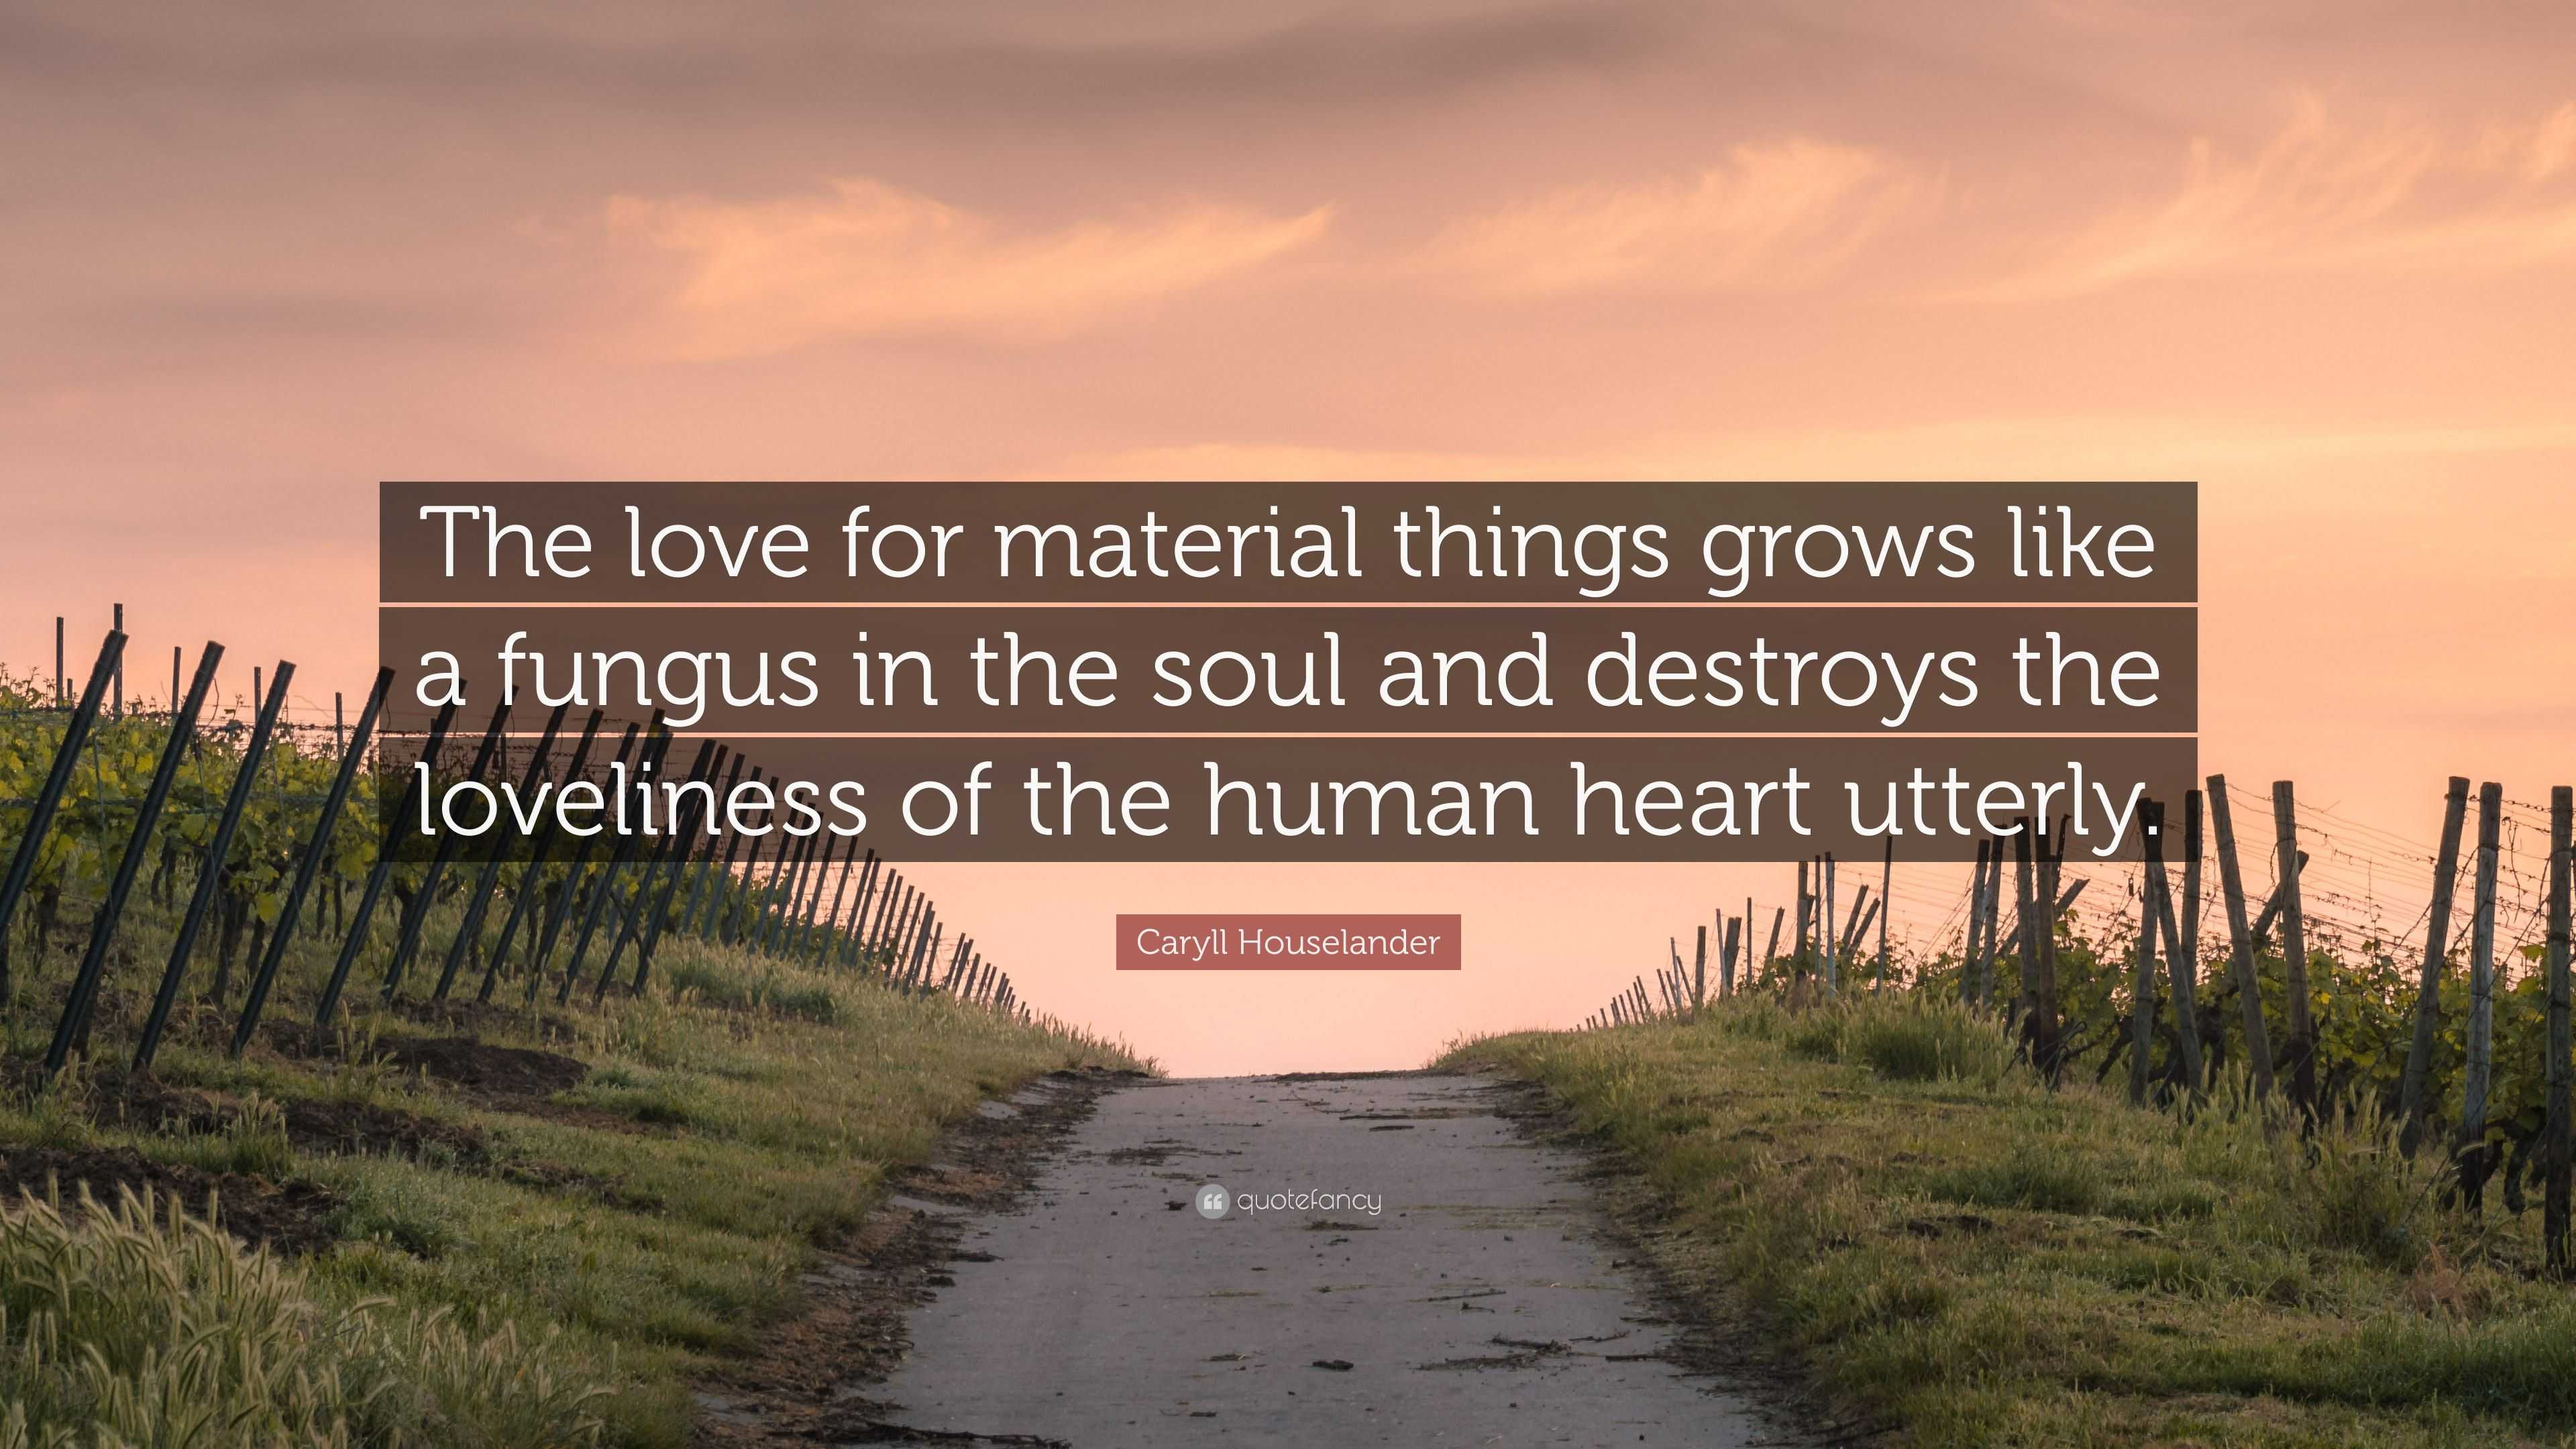 Caryll Houselander Quote: “The love for material things grows like